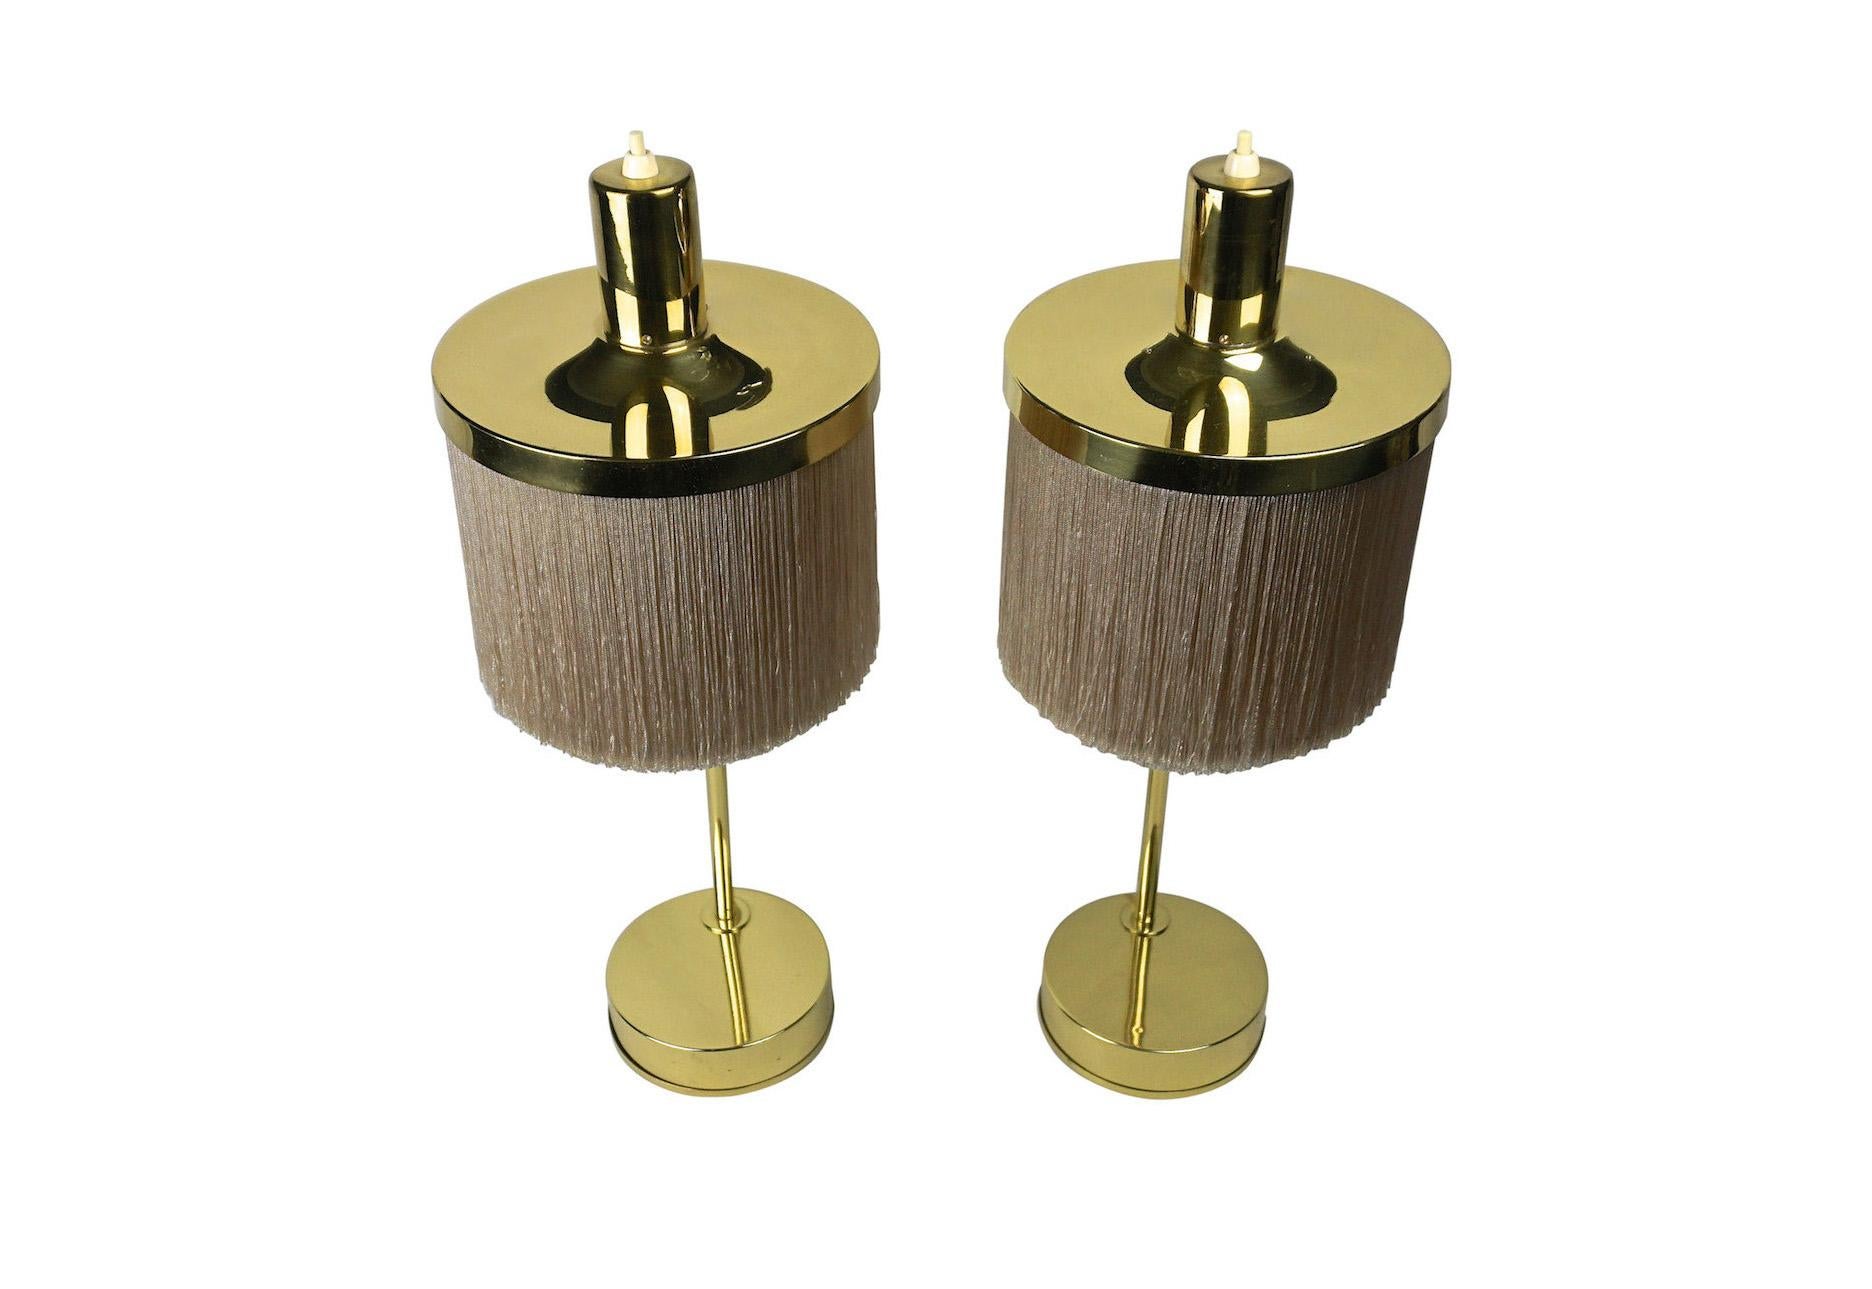 A pair of fringe silk brass table lamps model B-140 designed by Hans-Agne Jakobsson, produced by Hans-Agne Jakobsson in Markaryd, Sweden.